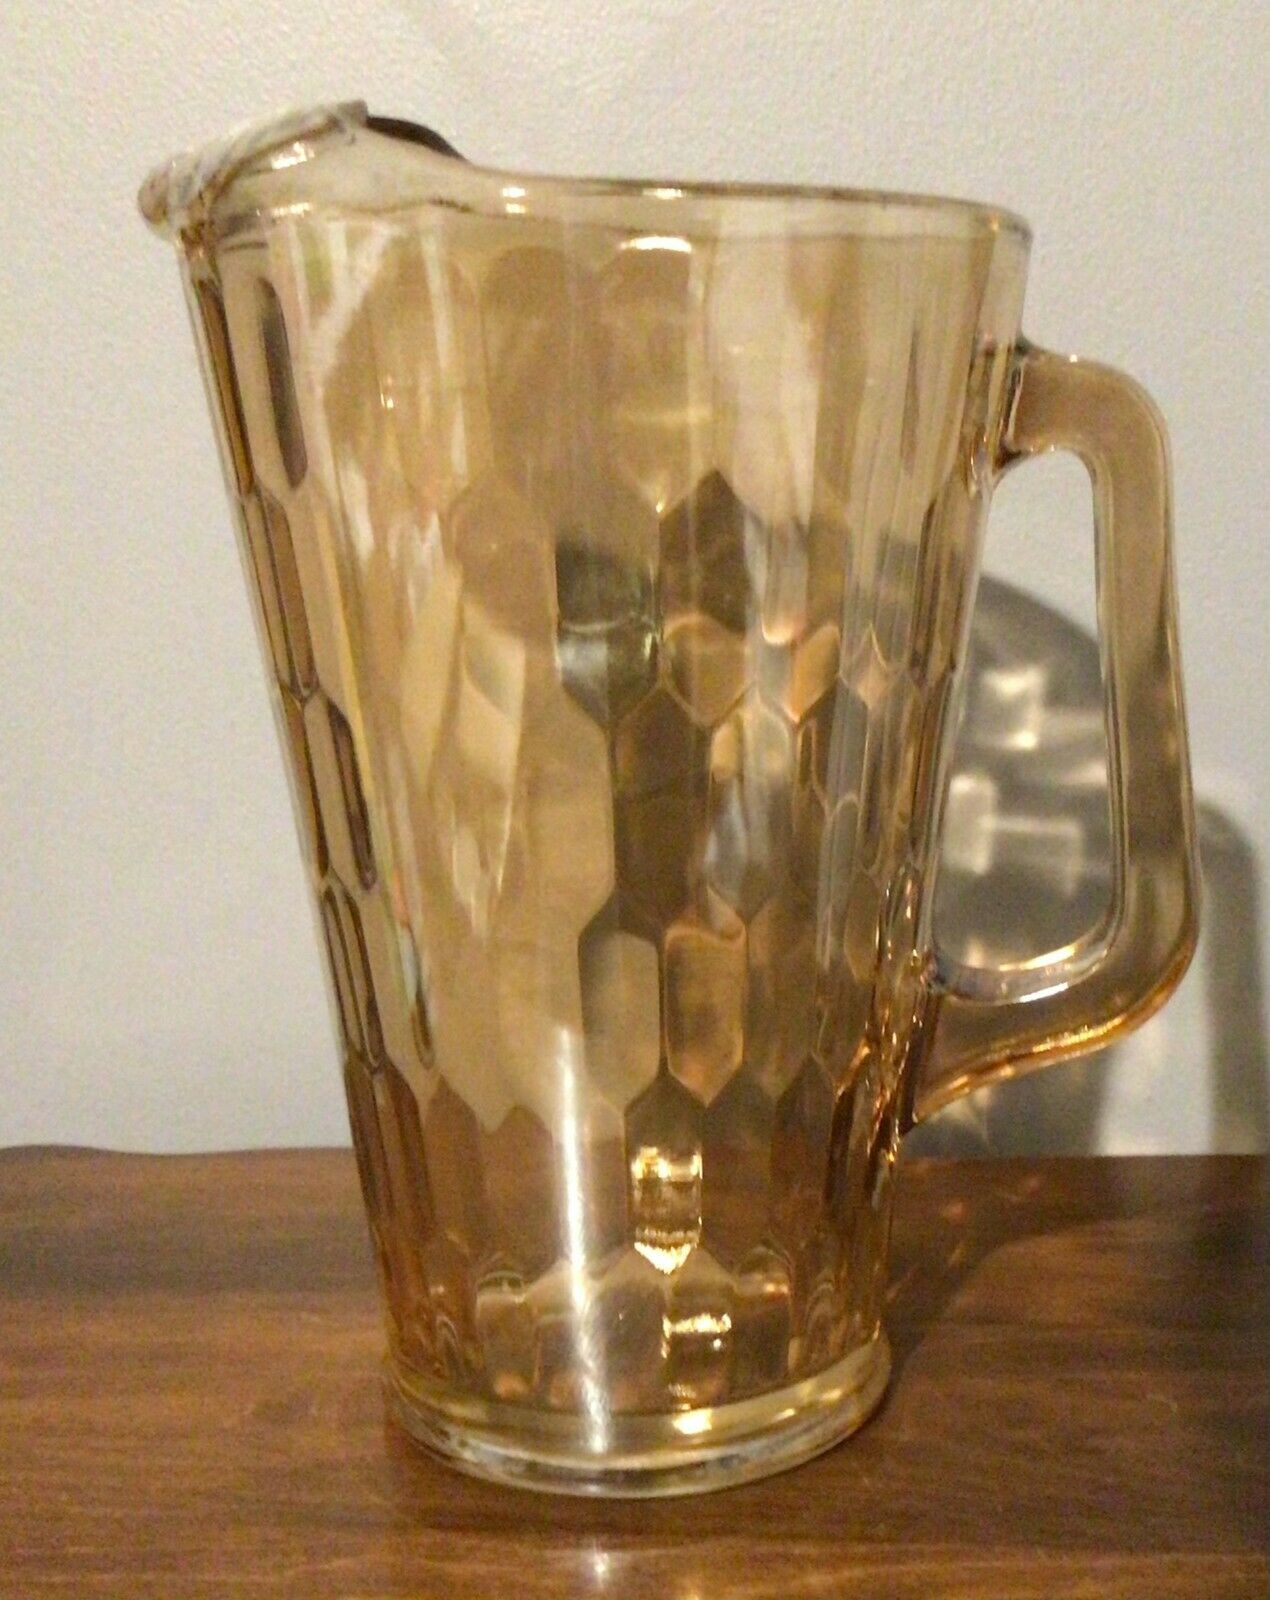 Jeanette Amber Carnival Glass 1/2 Gallon Pitcher - Honeycomb - Vintage